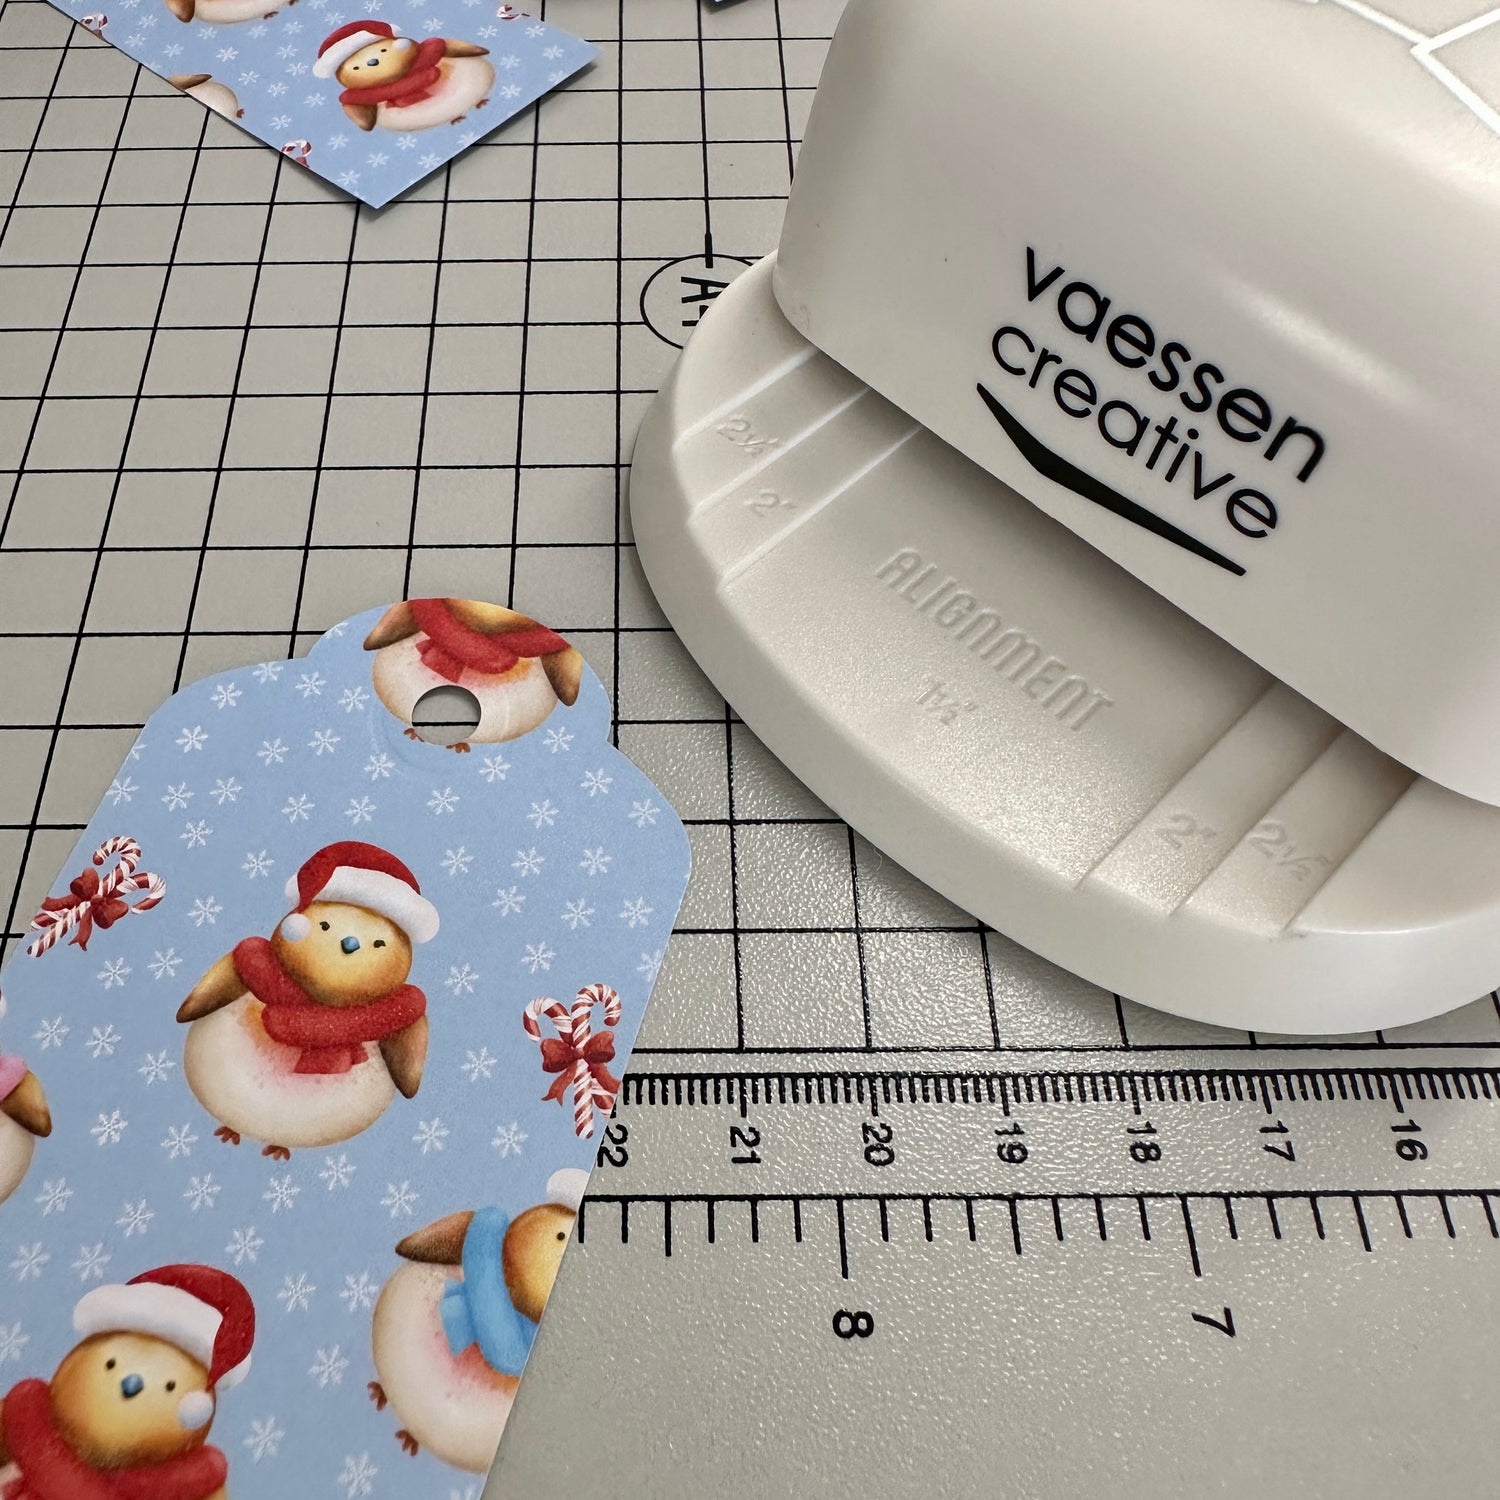 Latest Blog on sublimation and printable designs by Pretty Creative Designs UK